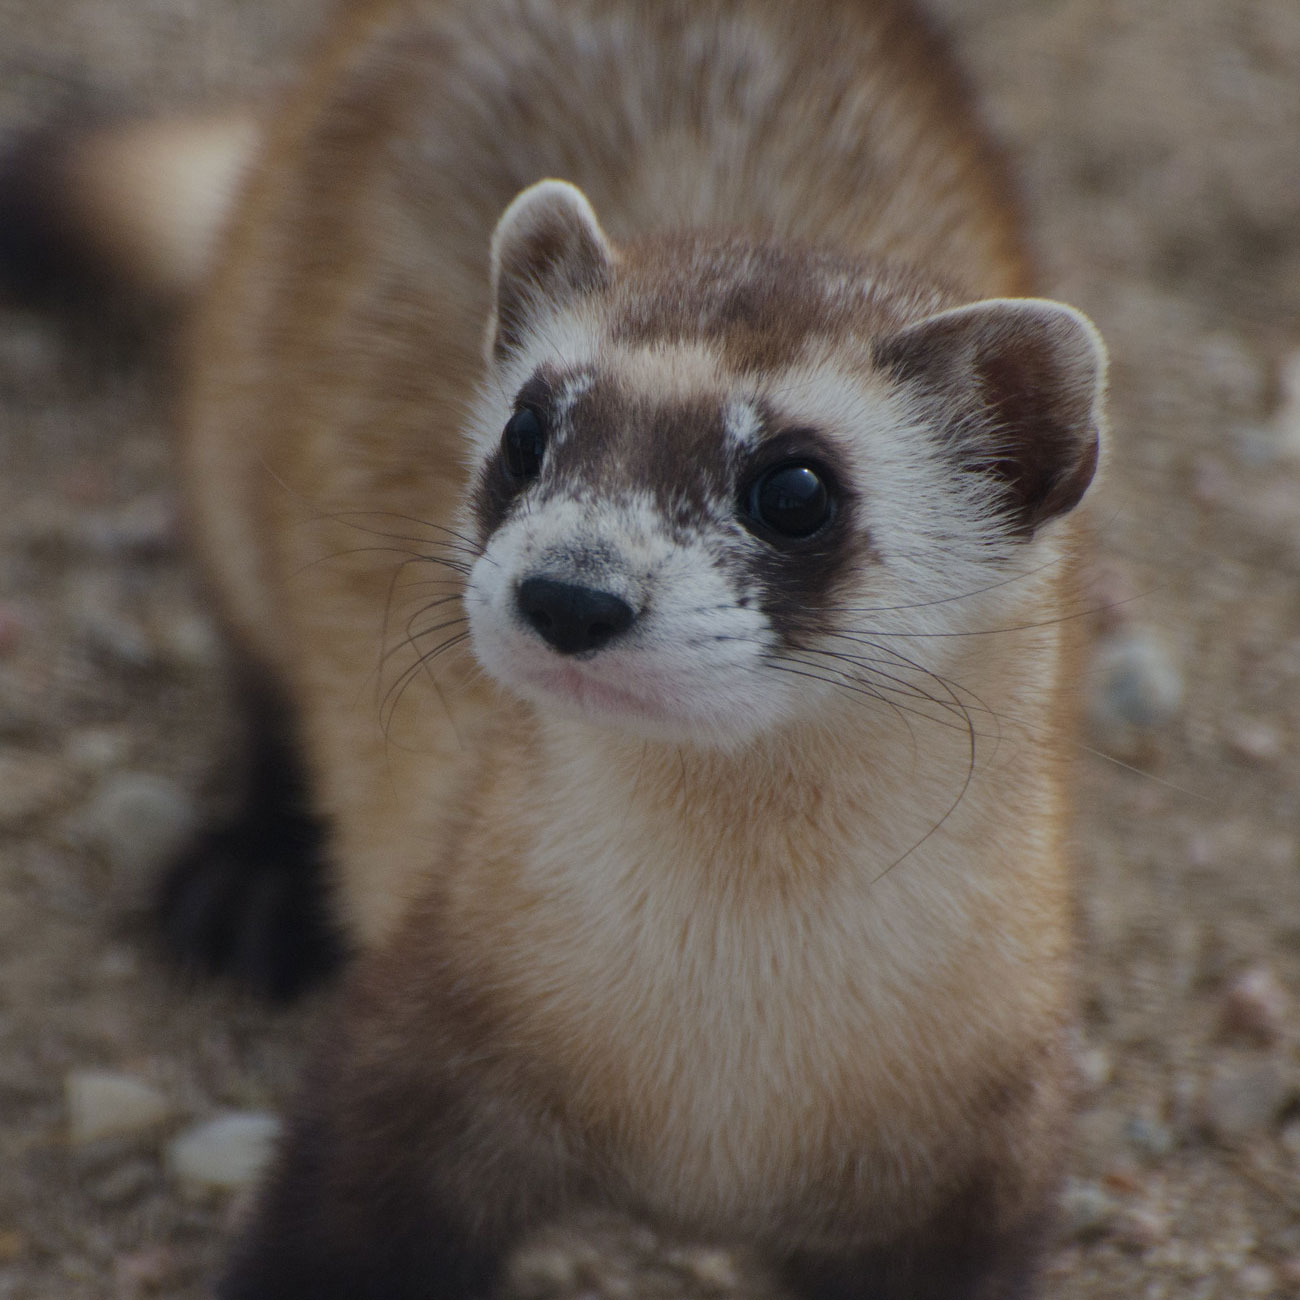 A black-footed ferret. The ferret is a weasel-like animal. It has four short legs, a long body, a medium-length tail, a short neck and small head with rounded ears. Its face is white with a black mask around its eyes. Its legs and the tip of its tail are also black, whereas its body is light brown.